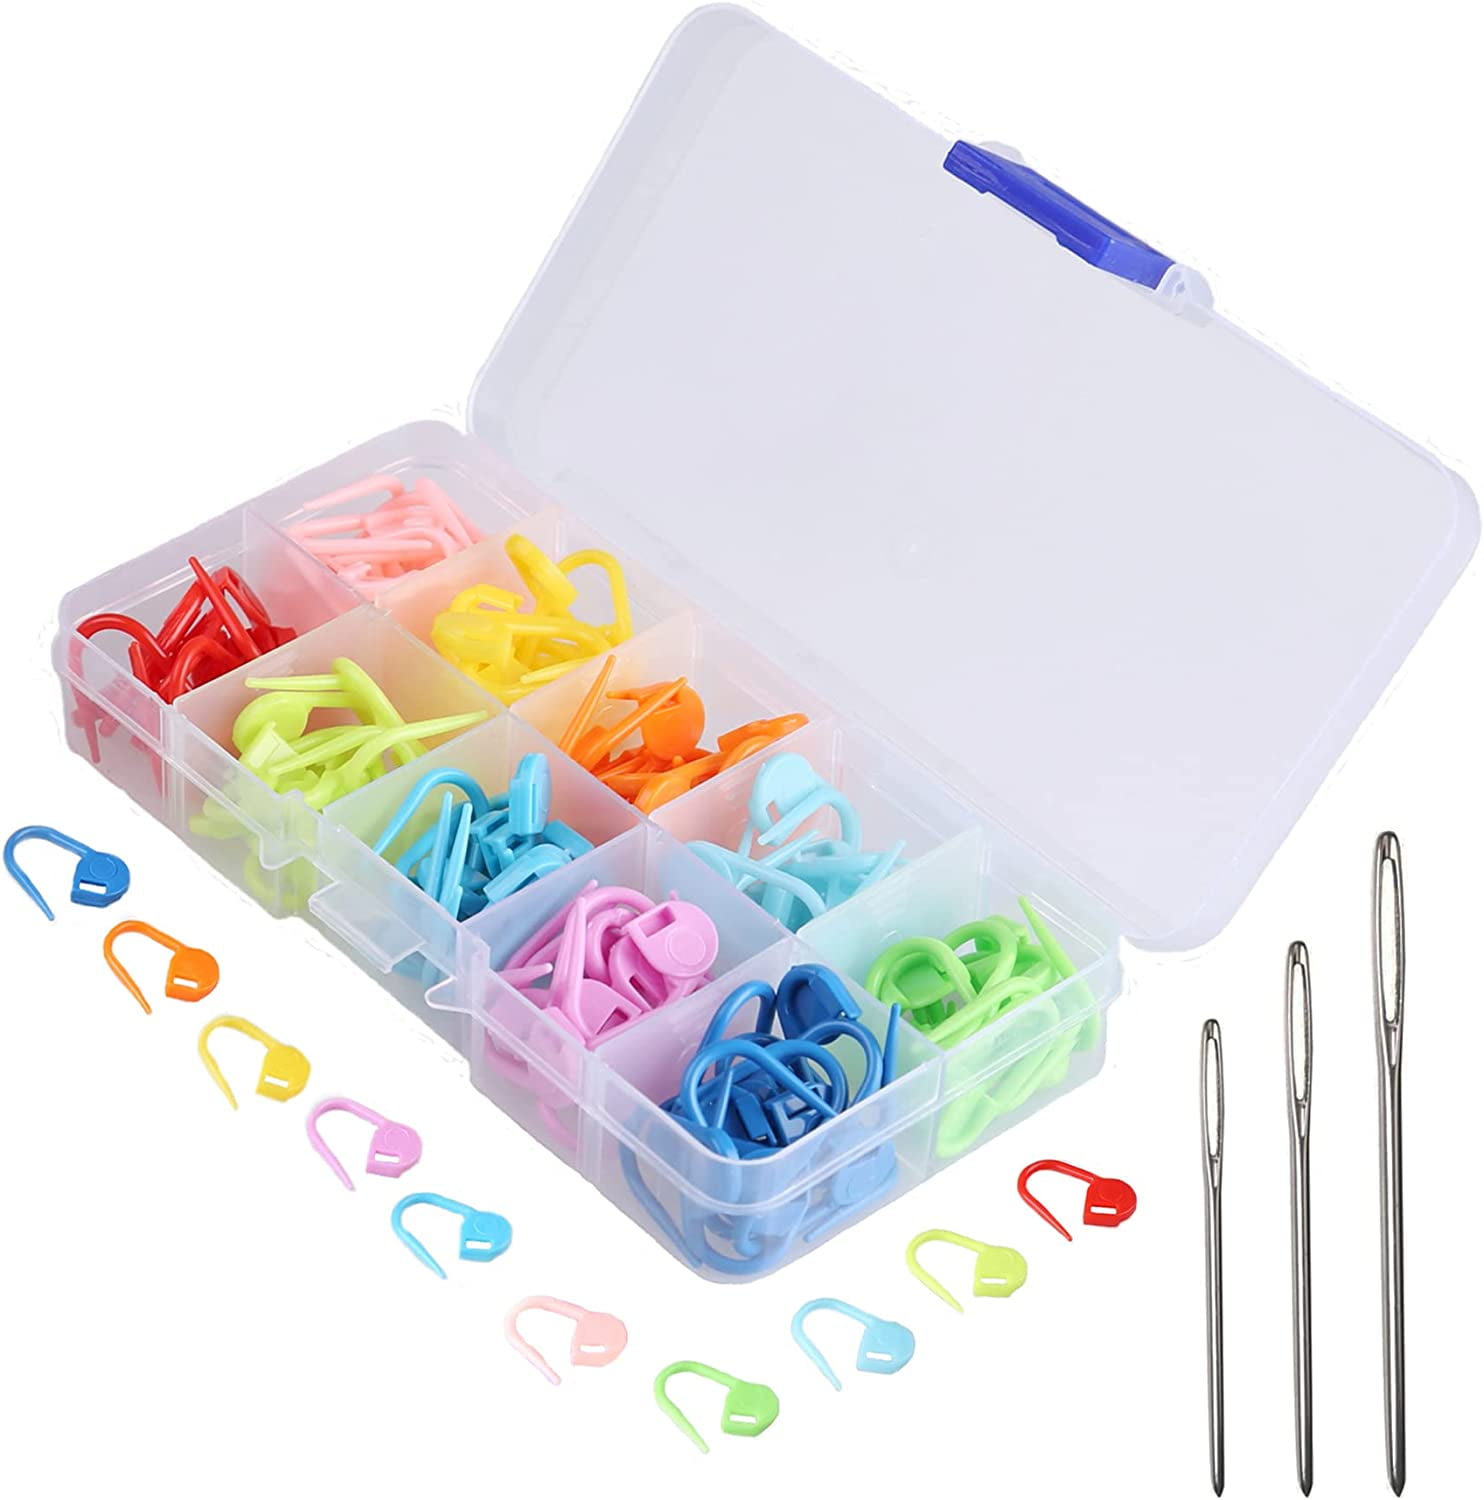  500 Pieces Colorful Knitting Markers Crochet Clips, Knitting  Crochet Stitch Markers, Stitch Counter Needle Clips for Knitting DIY Craft  Plastic Safety Pins : Office Products